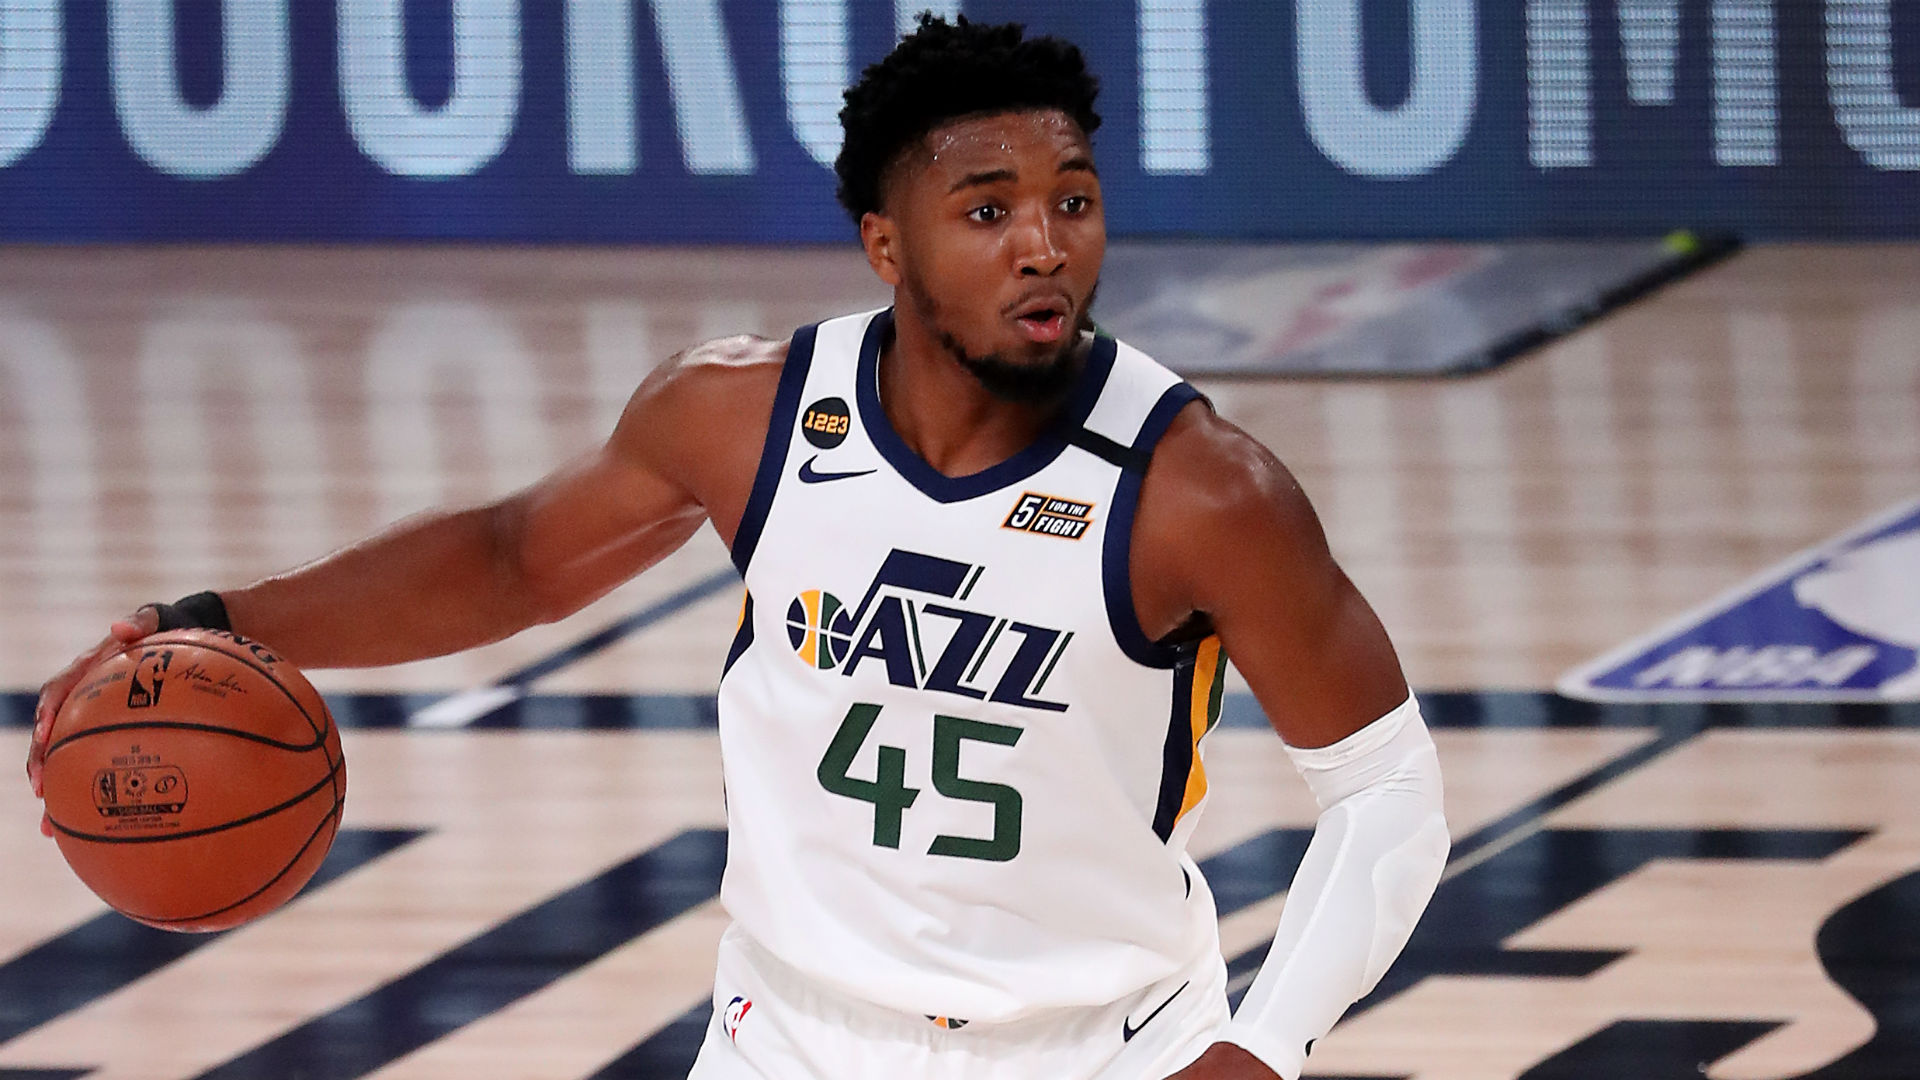 Utah Jazz pair Donovan Mitchell and Rudy Gobert were both fined by the NBA for their public criticism of officials.